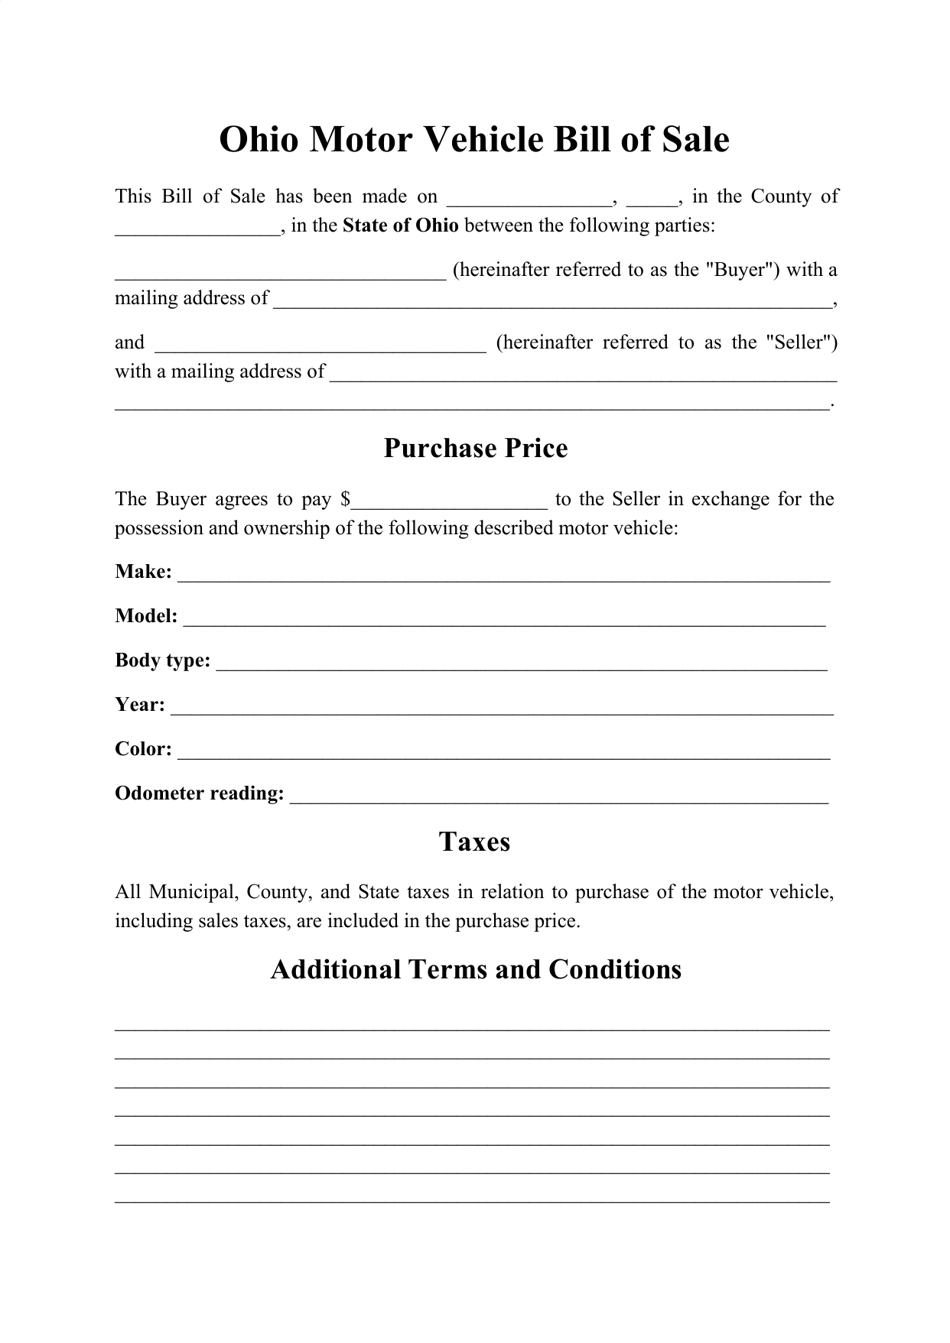 ohio-motor-vehicle-bill-of-sale-form-fill-out-sign-online-and-download-pdf-templateroller